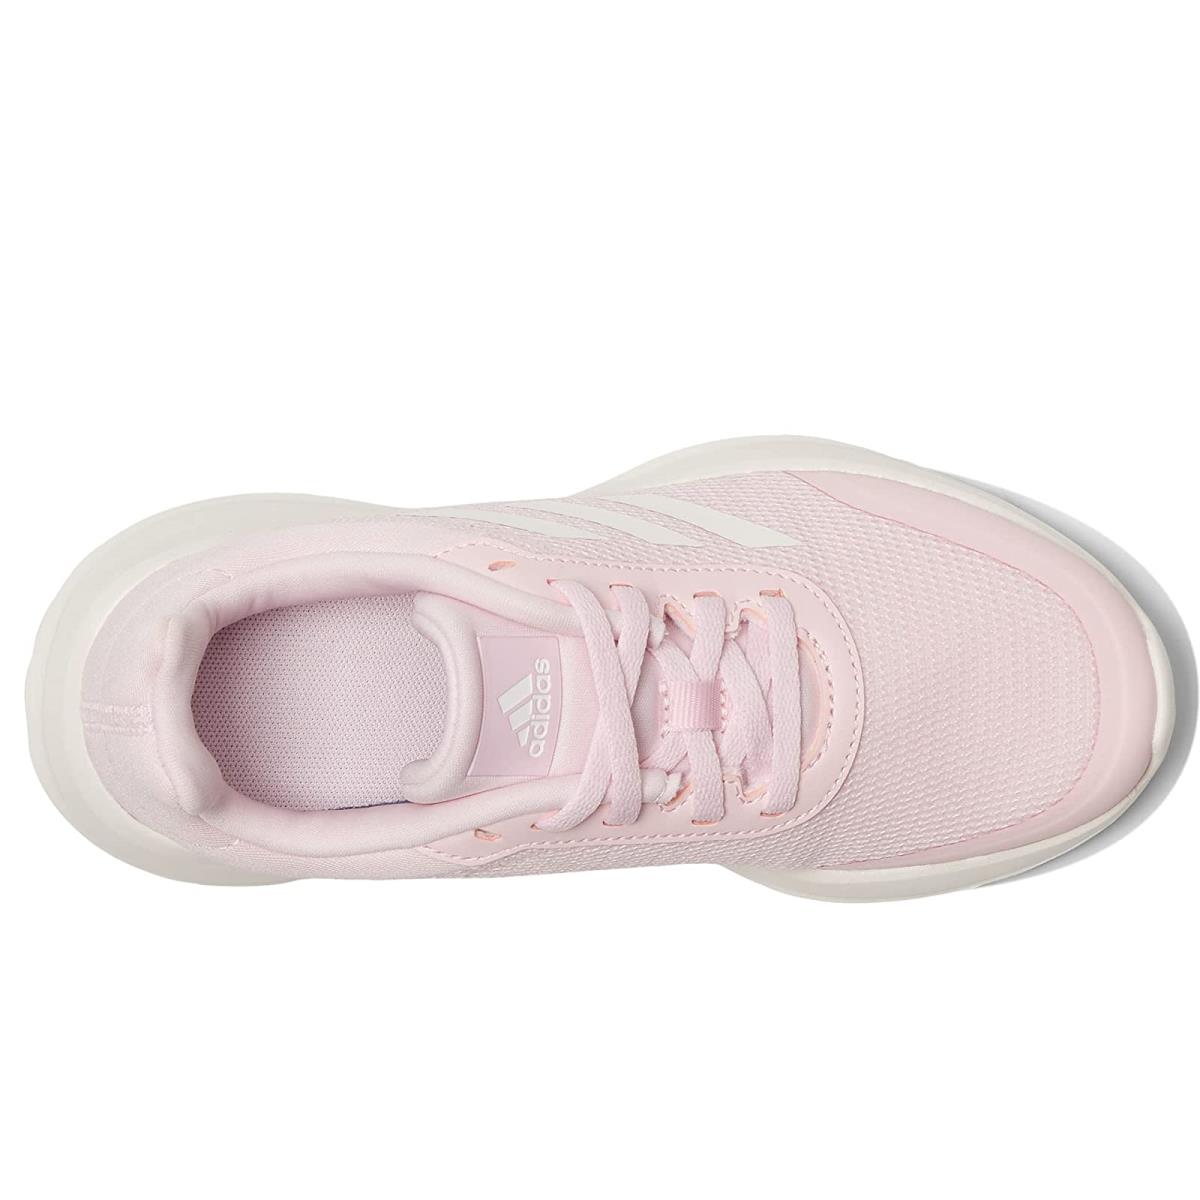 Adidas shoes  - Clear Pink/White/Clear Pink 0